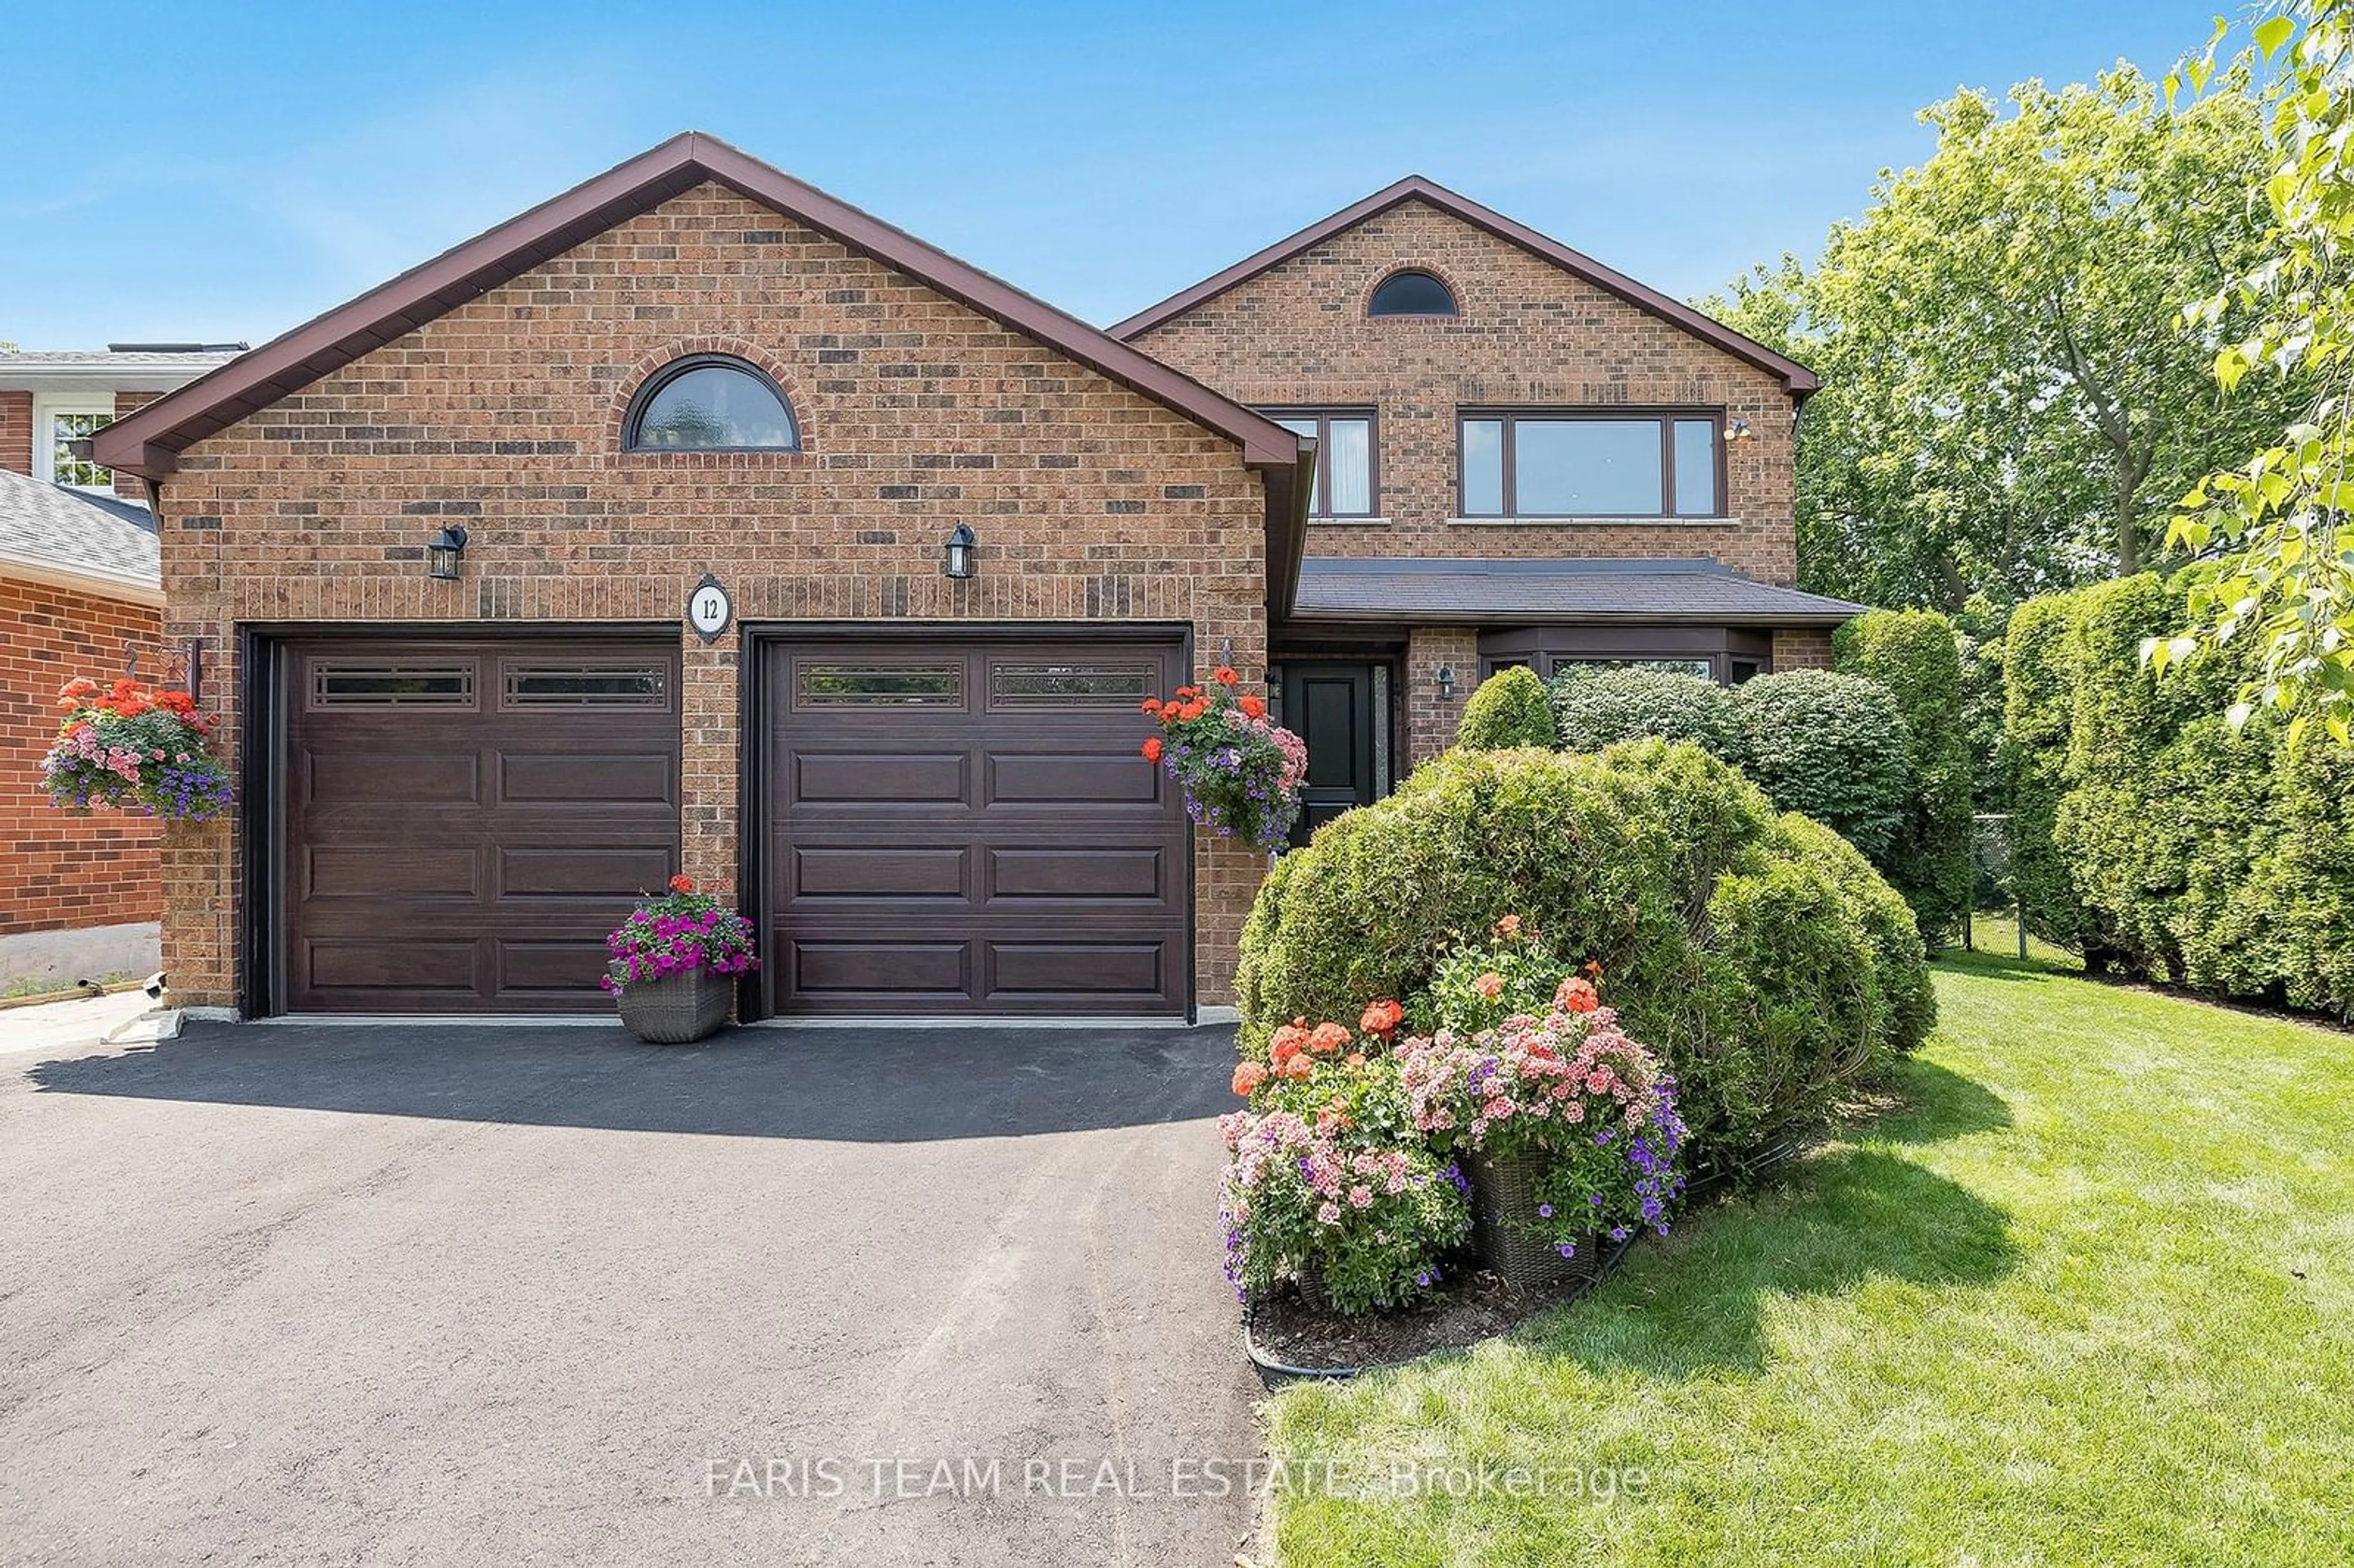 Home with brick exterior material for 12 Lincoln Pl, Markham Ontario L3P 7B6